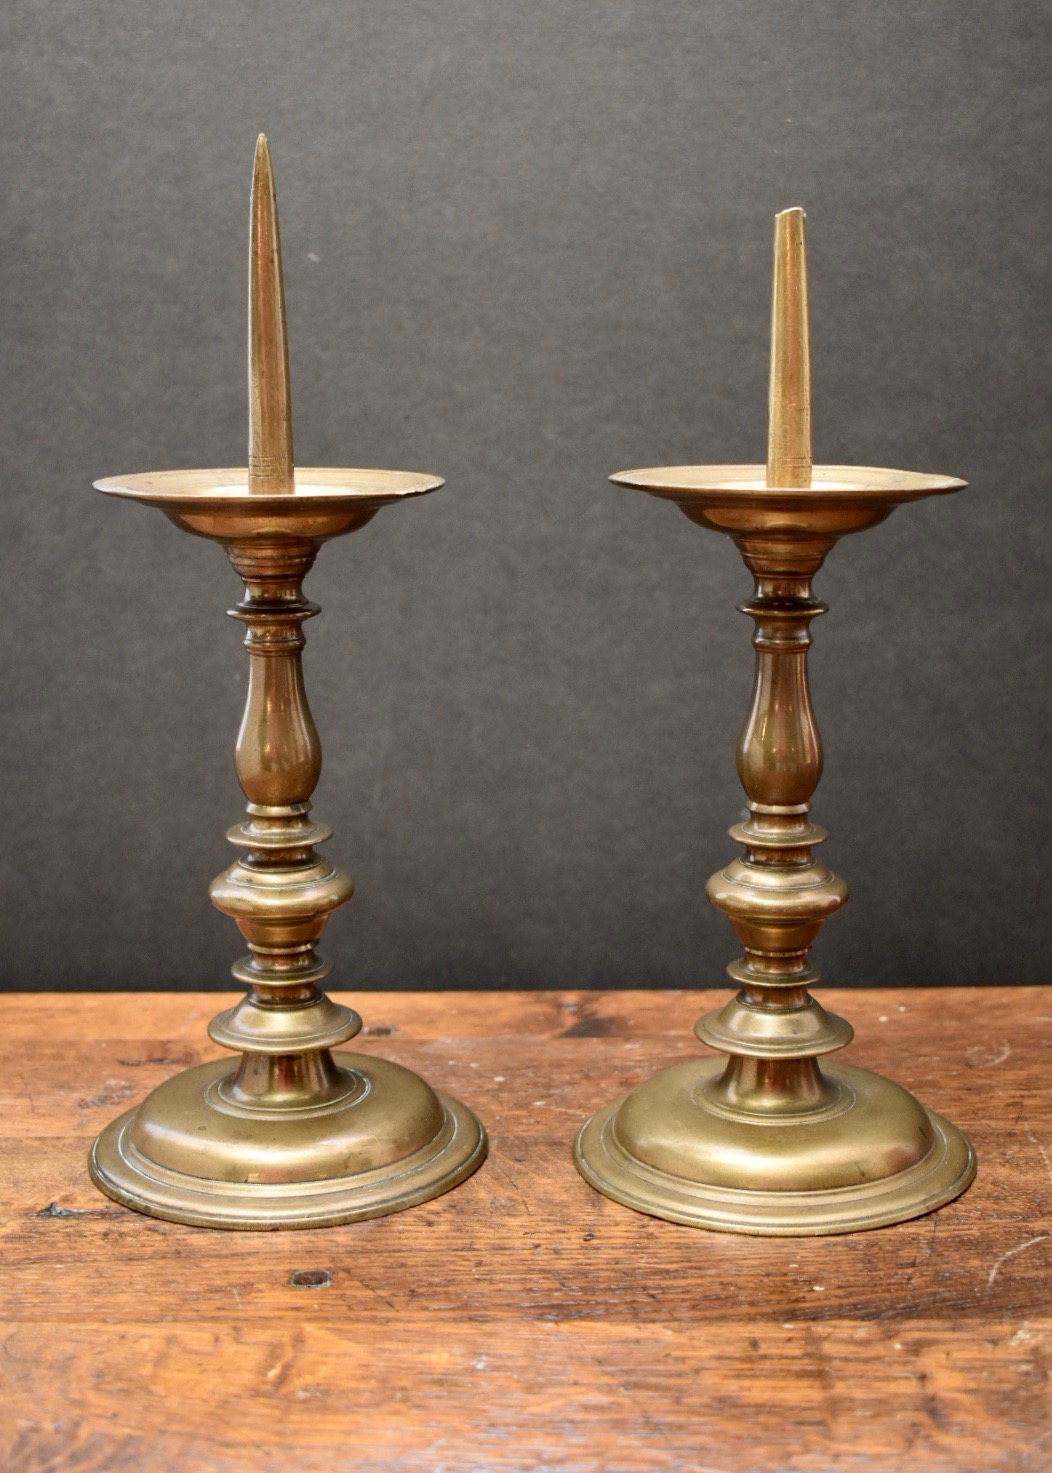 Antique Pair of Two French Early 17th Century Pricket Sticks